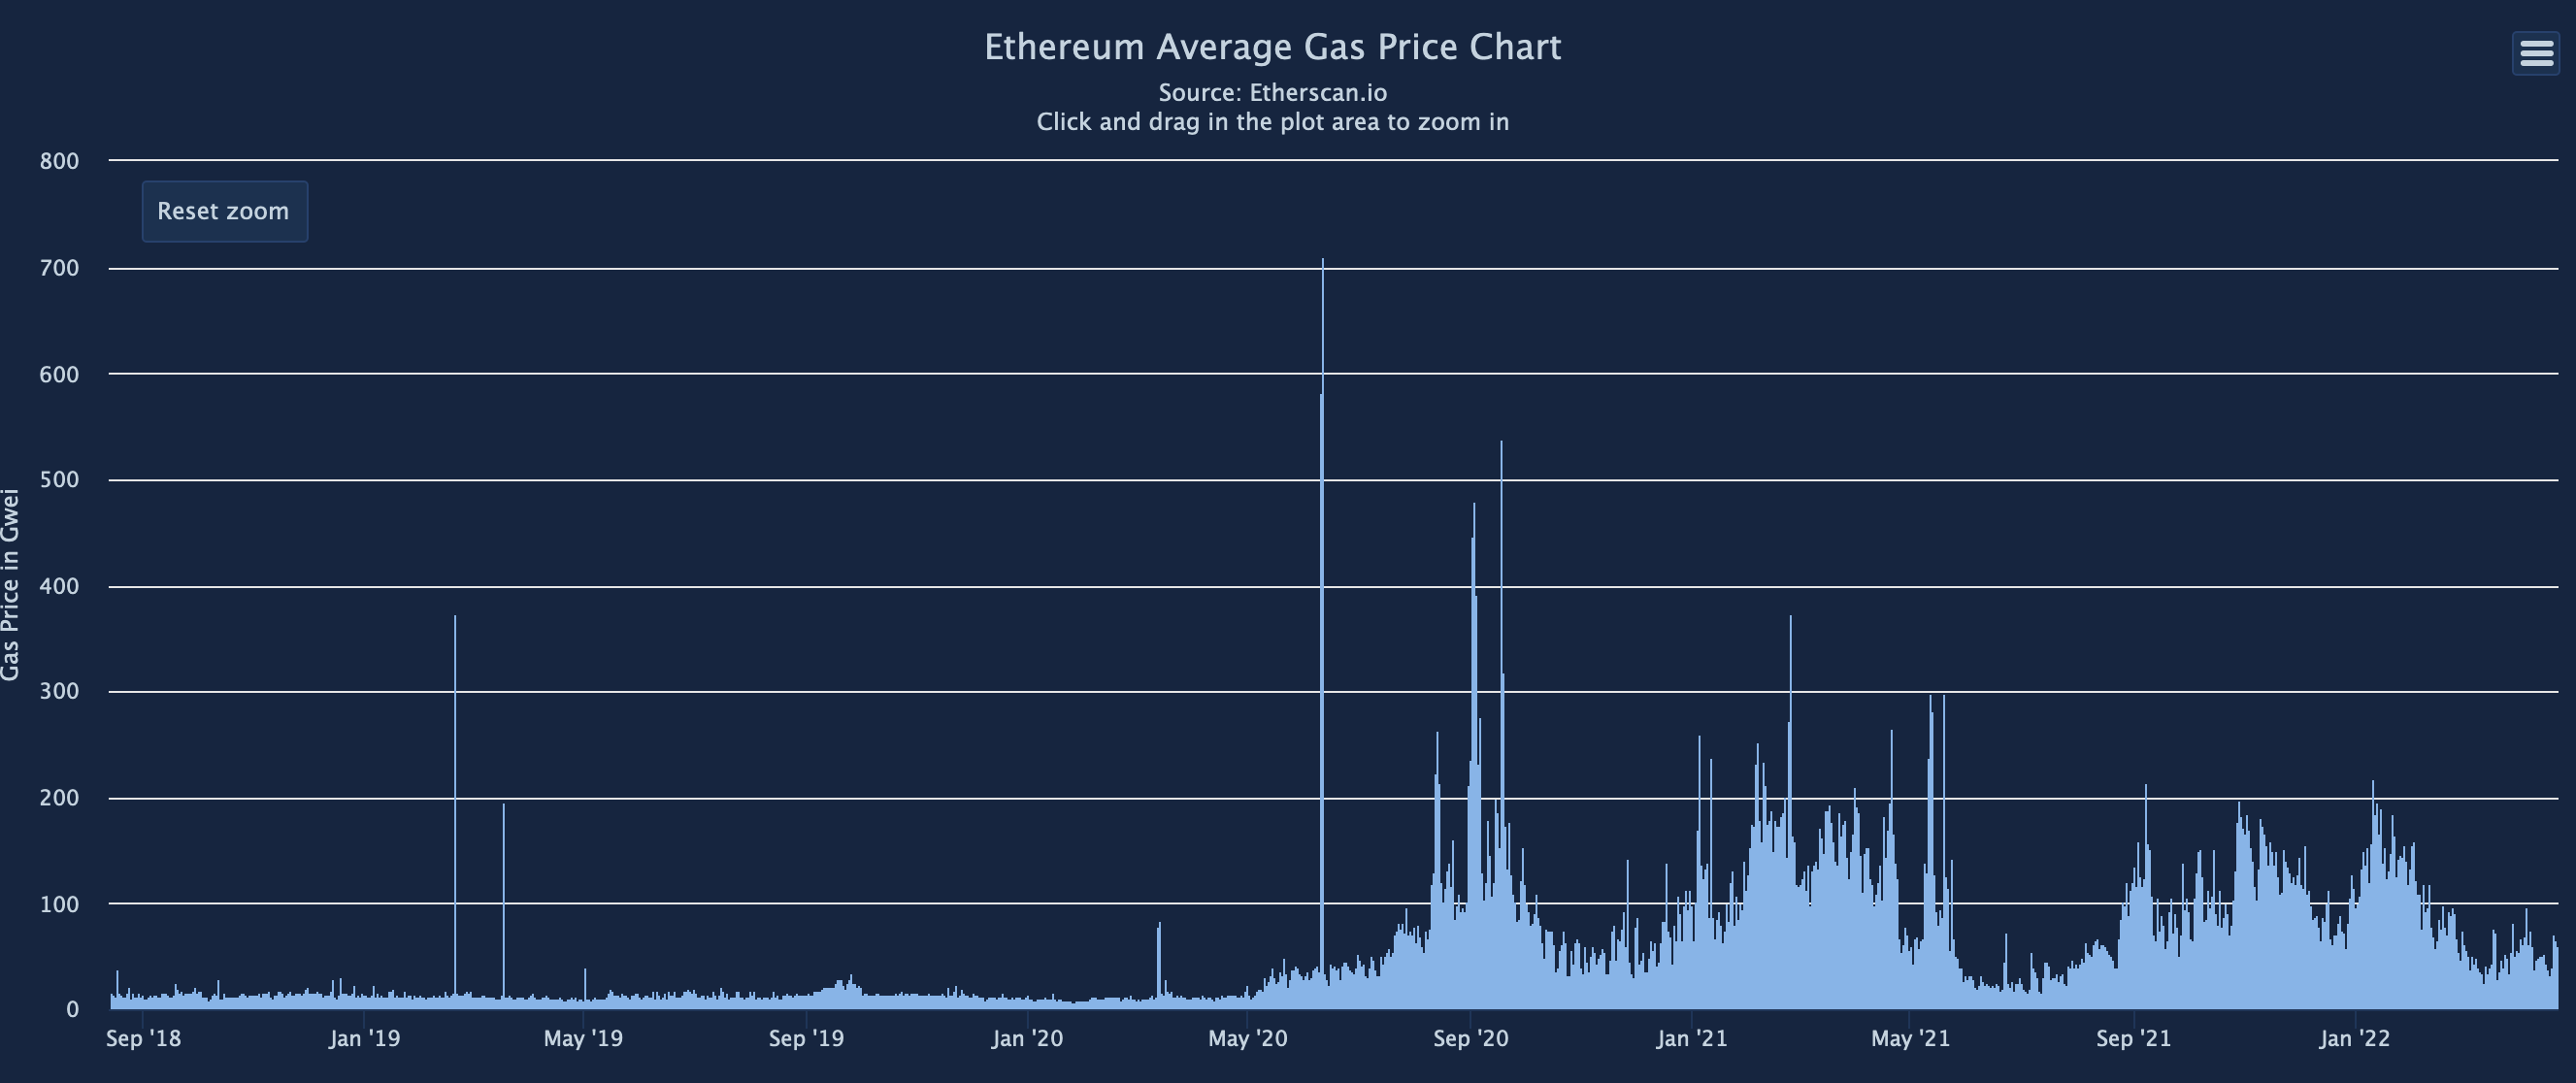 Consistent high gas fees were seen as the NFT scene exploded in 2021. Source: Etherscan